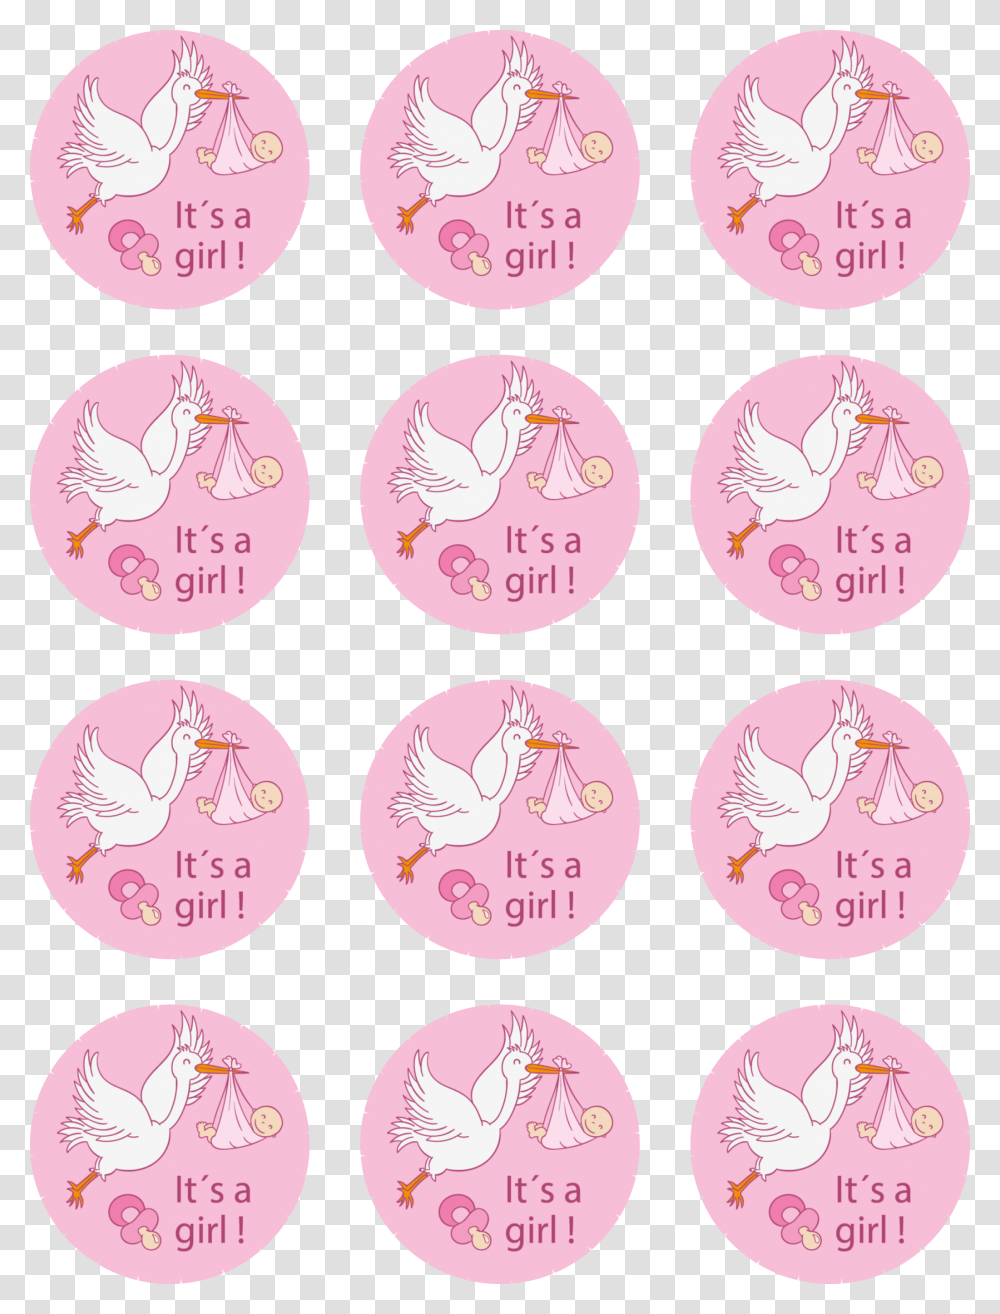 Clip Art Its A Girl Cupcake Toppers Shower Baby Topper Its Girl, Cosmetics, Label, Face Makeup Transparent Png